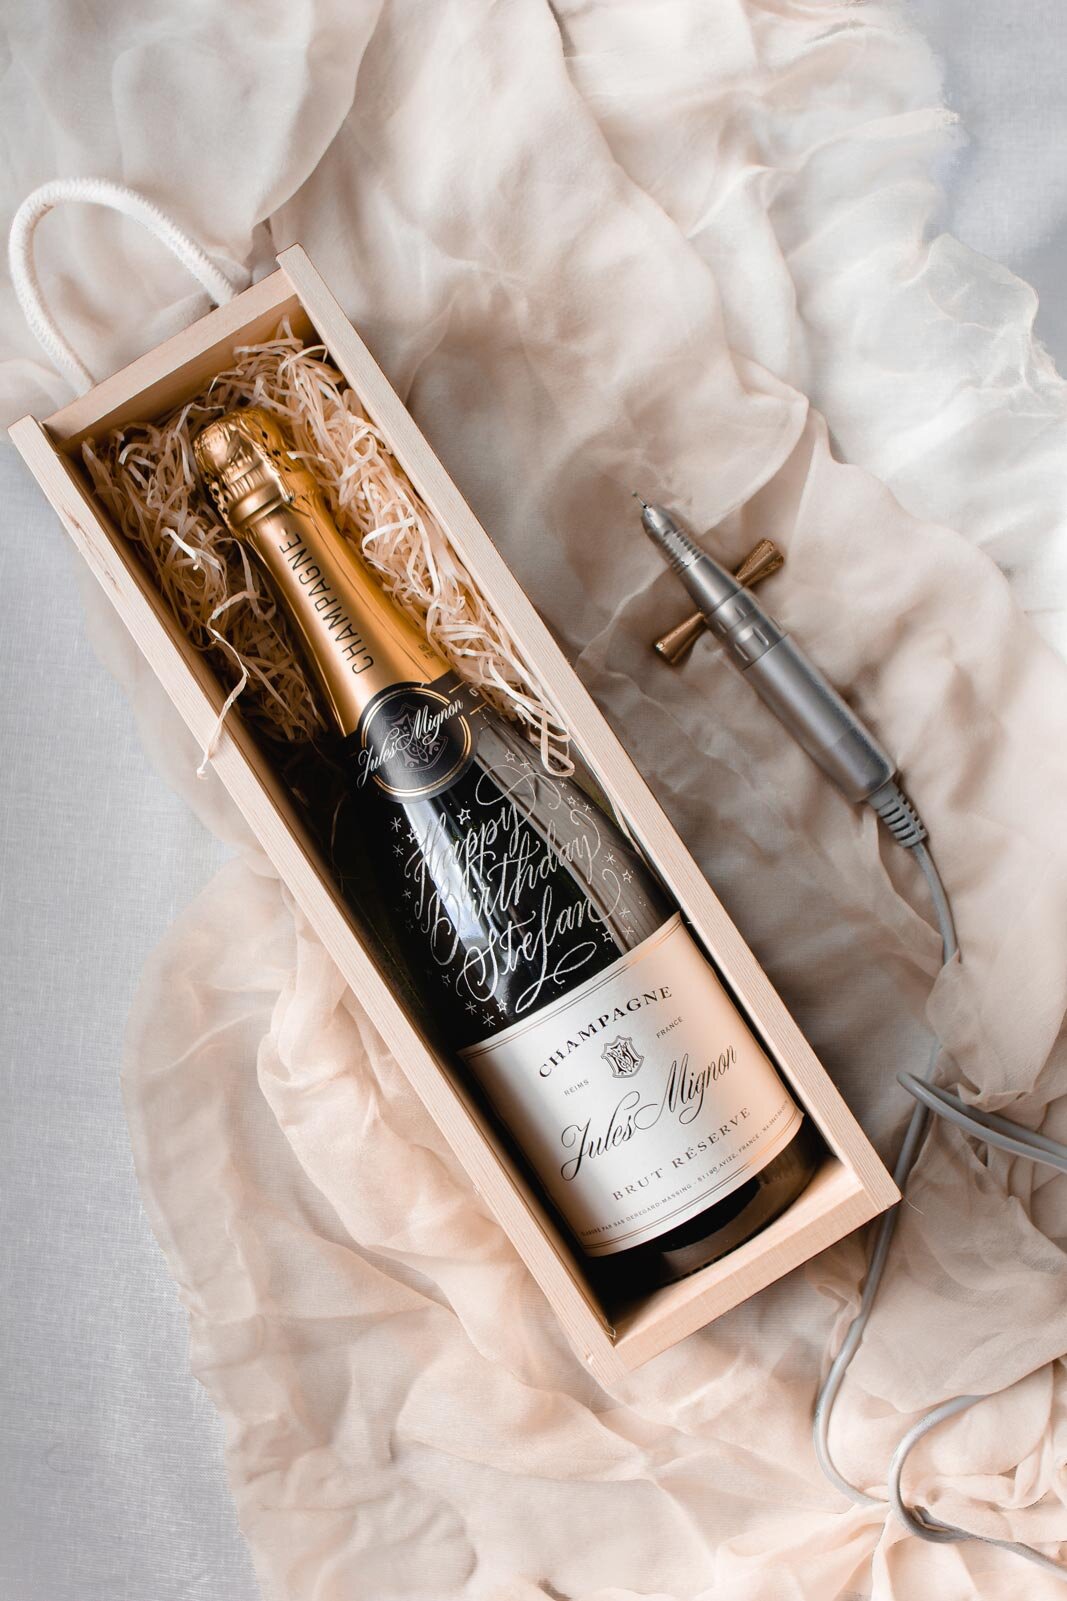 event-calligraphy-engraving-personalisation-london-champagne-bottle.jpg